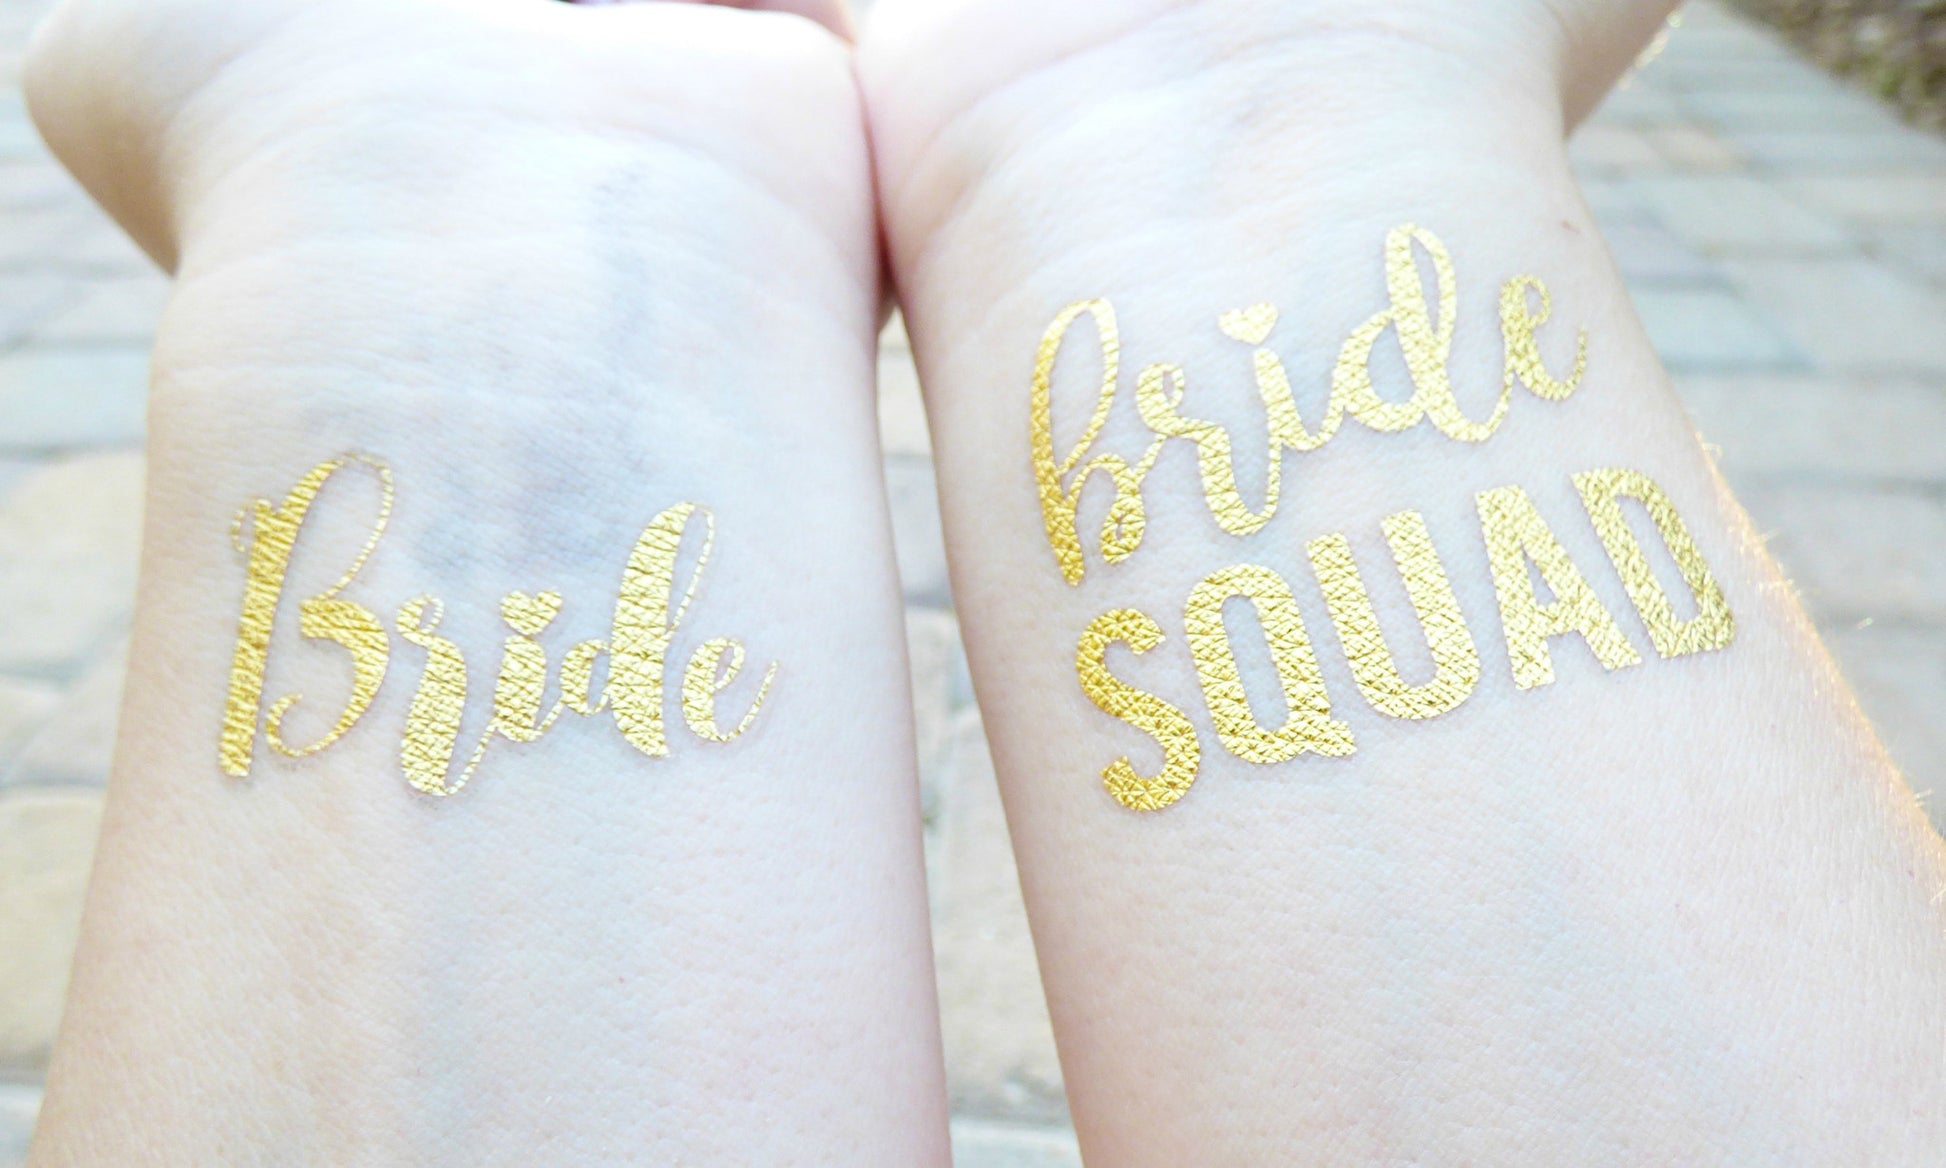 Bride and Bride Squad temporary tattoos on wrist for bachelorette party